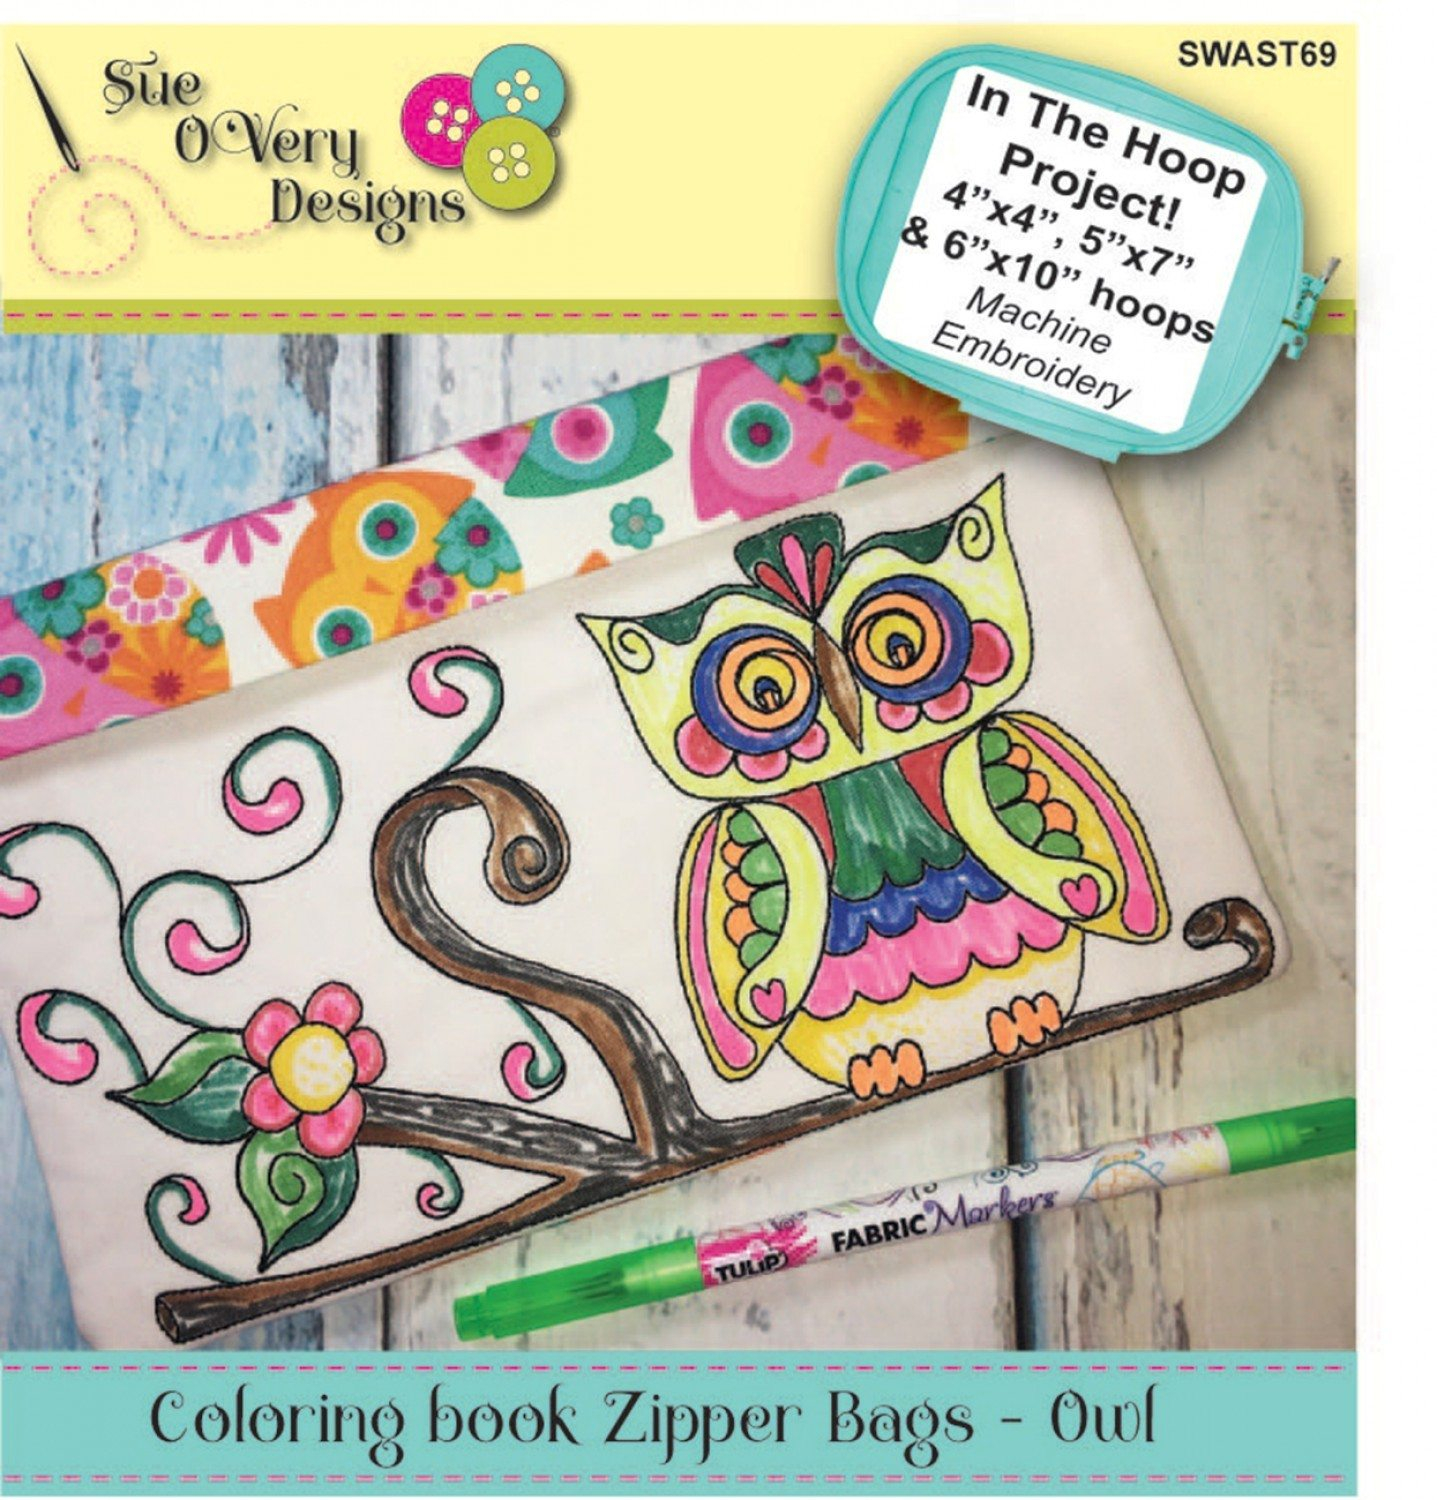 In The Hoop Embroidery Patterns Sue Overy Designs Owl Coloring Book Zipper Bags In The Hoop Embroidery Cd